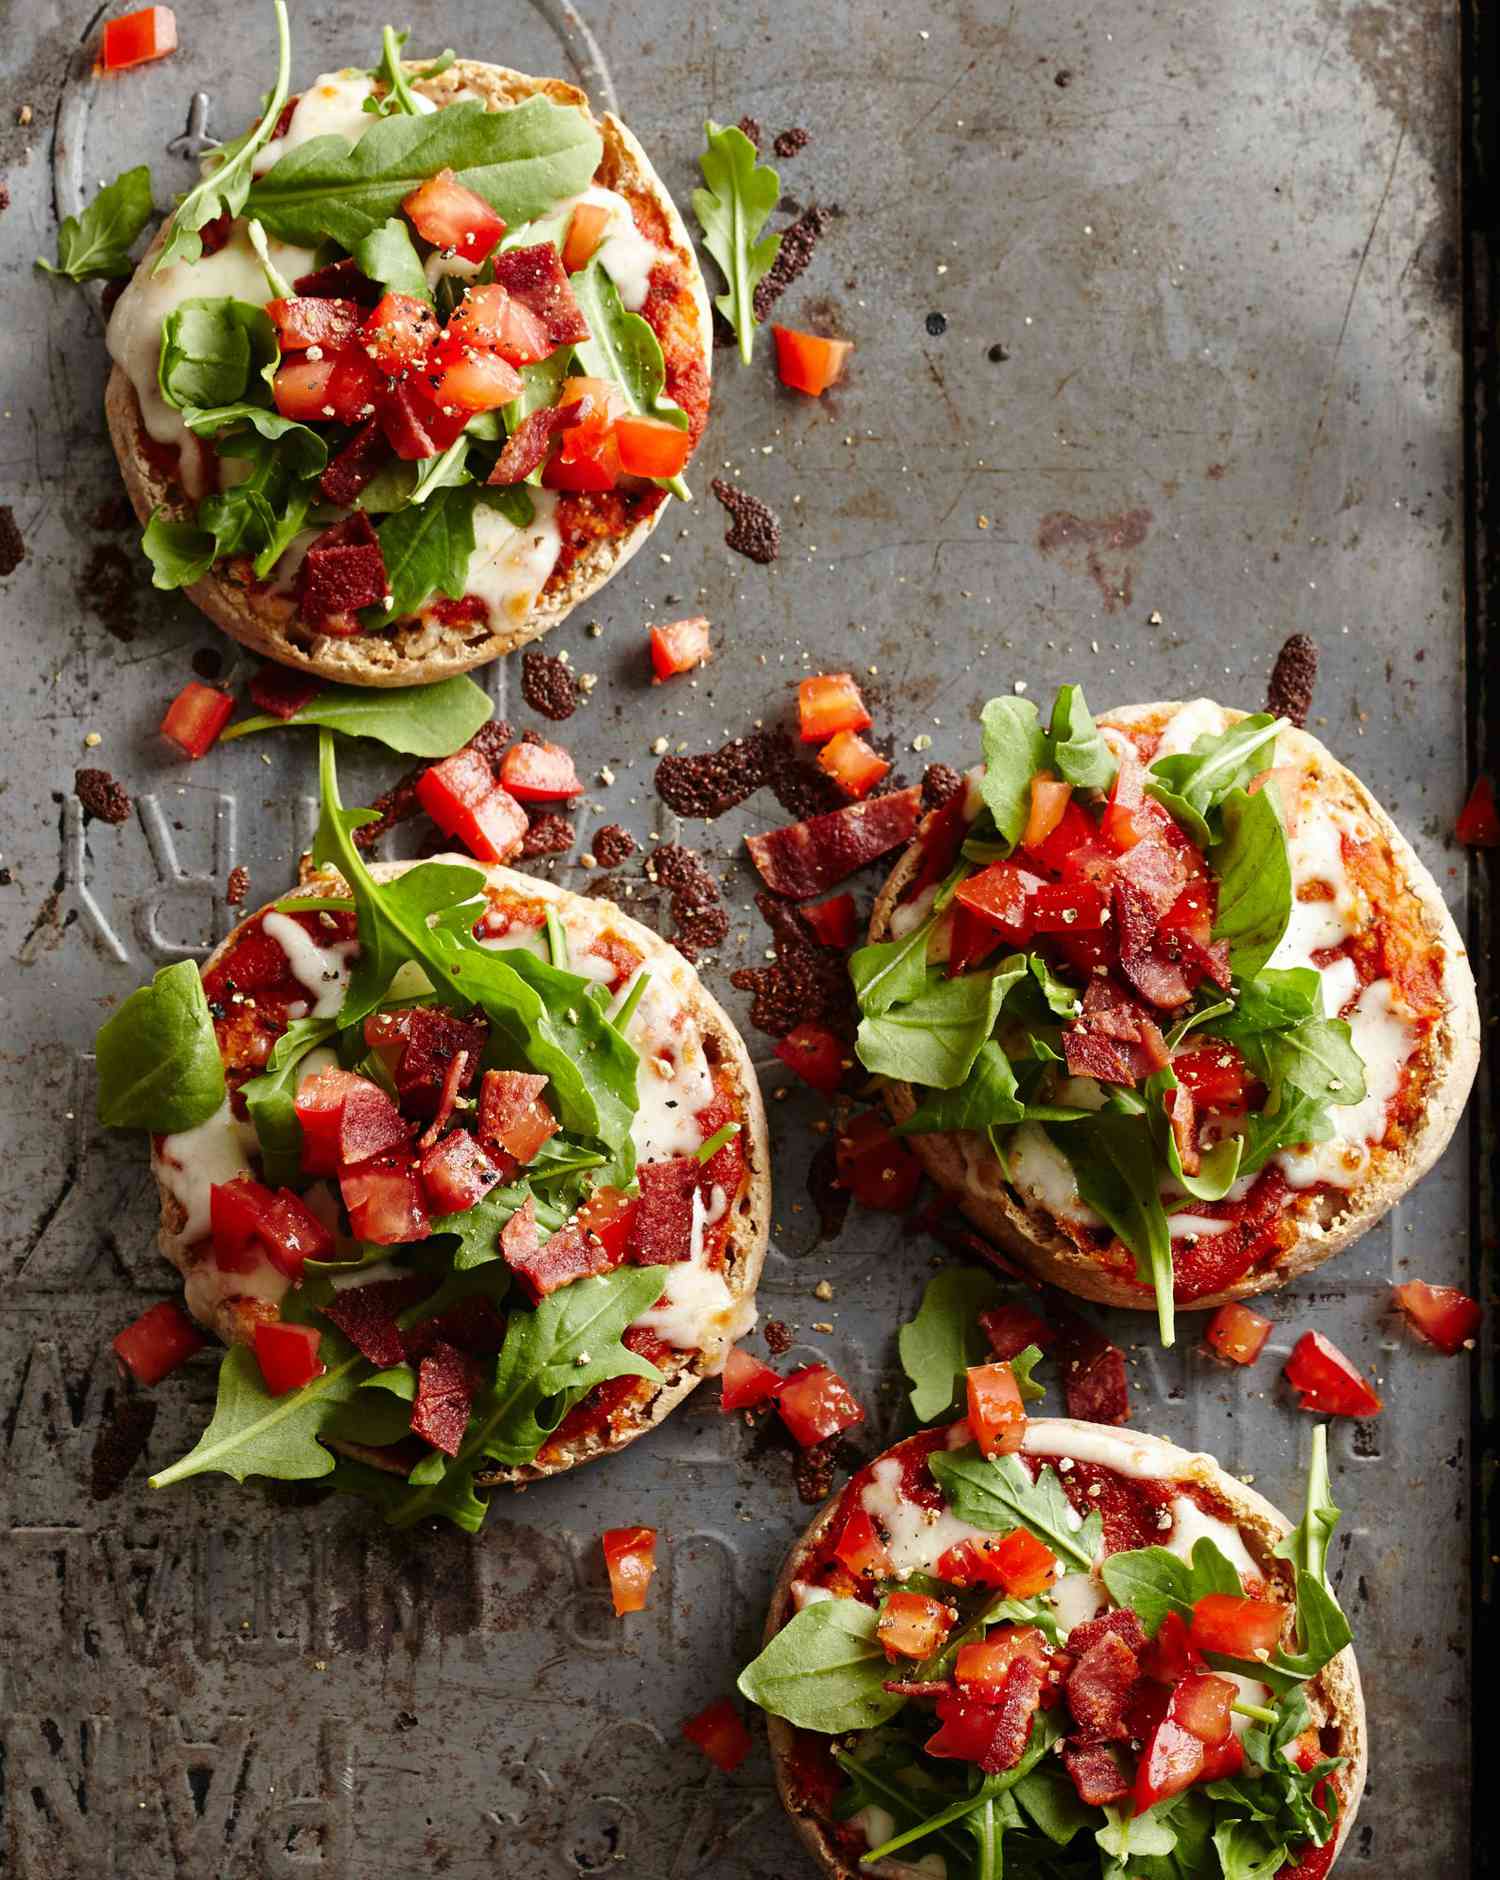 <p>Using English muffins in place of dough saves time and makes for easy portioning. Top with sauce, arugula, tomatoes, mozz and turkey bacon for a satisfying, crunchy lunch or quick dinner. </p>
                          